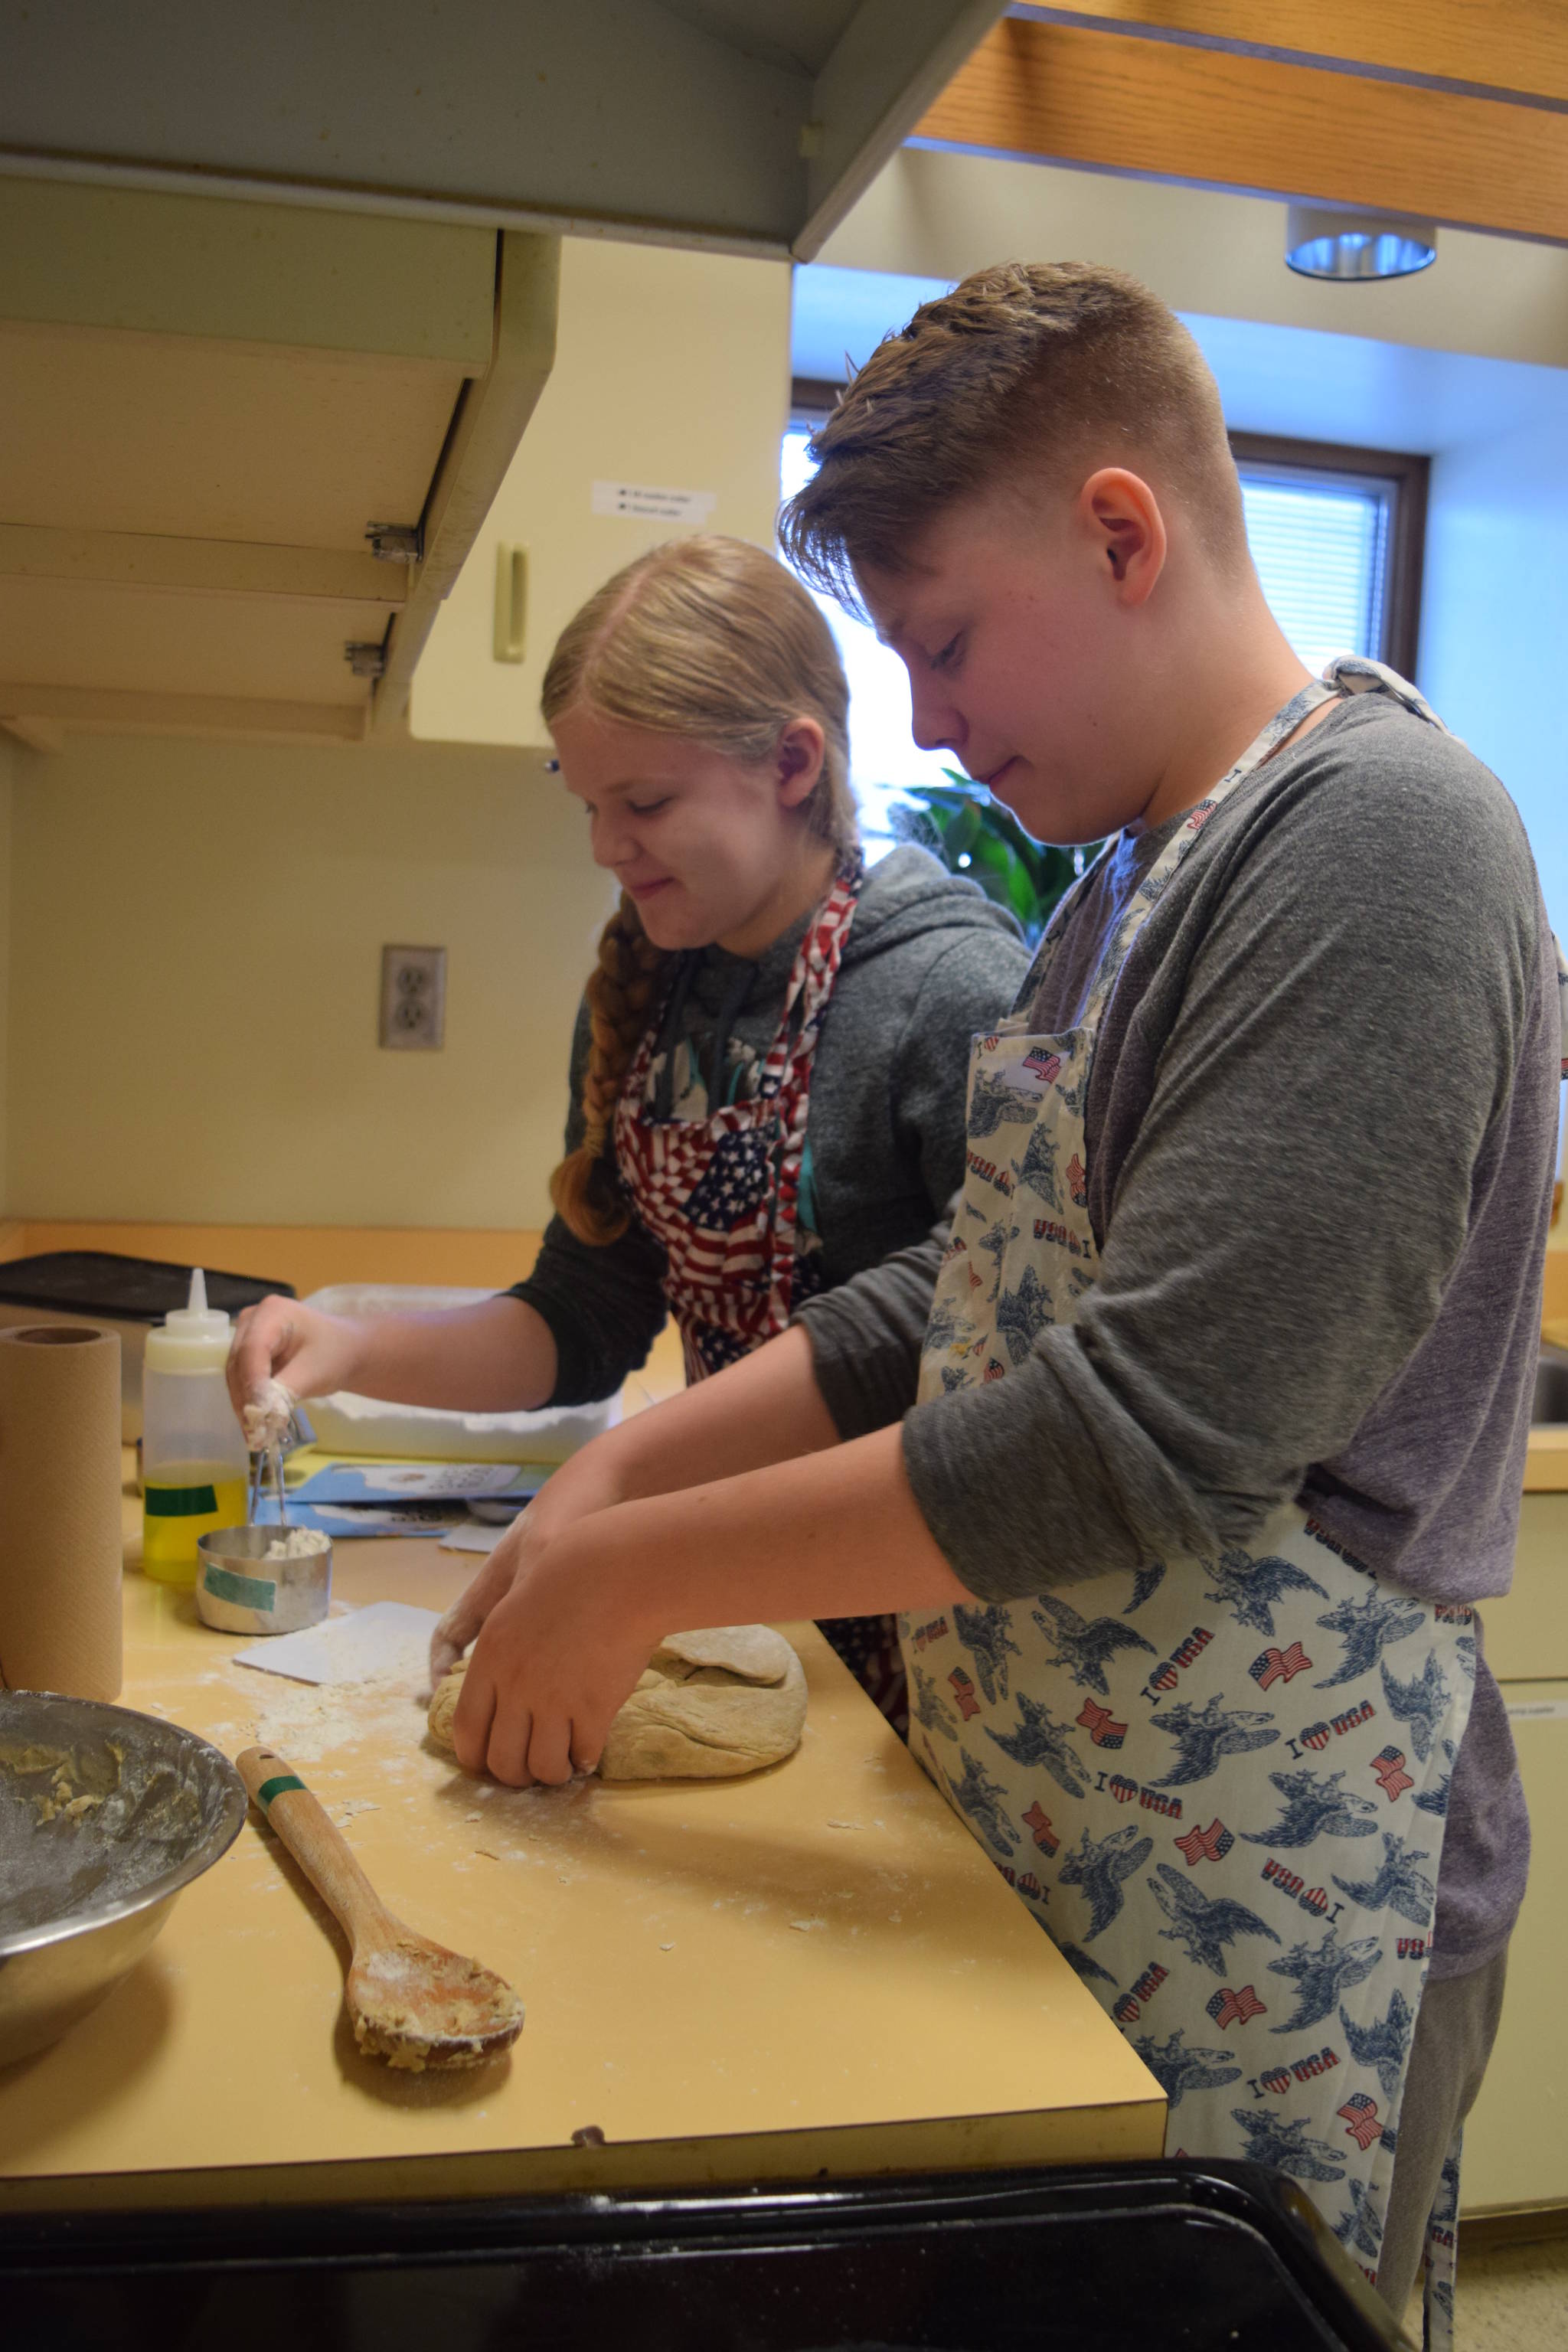 HMS students bake bread for learning, caring